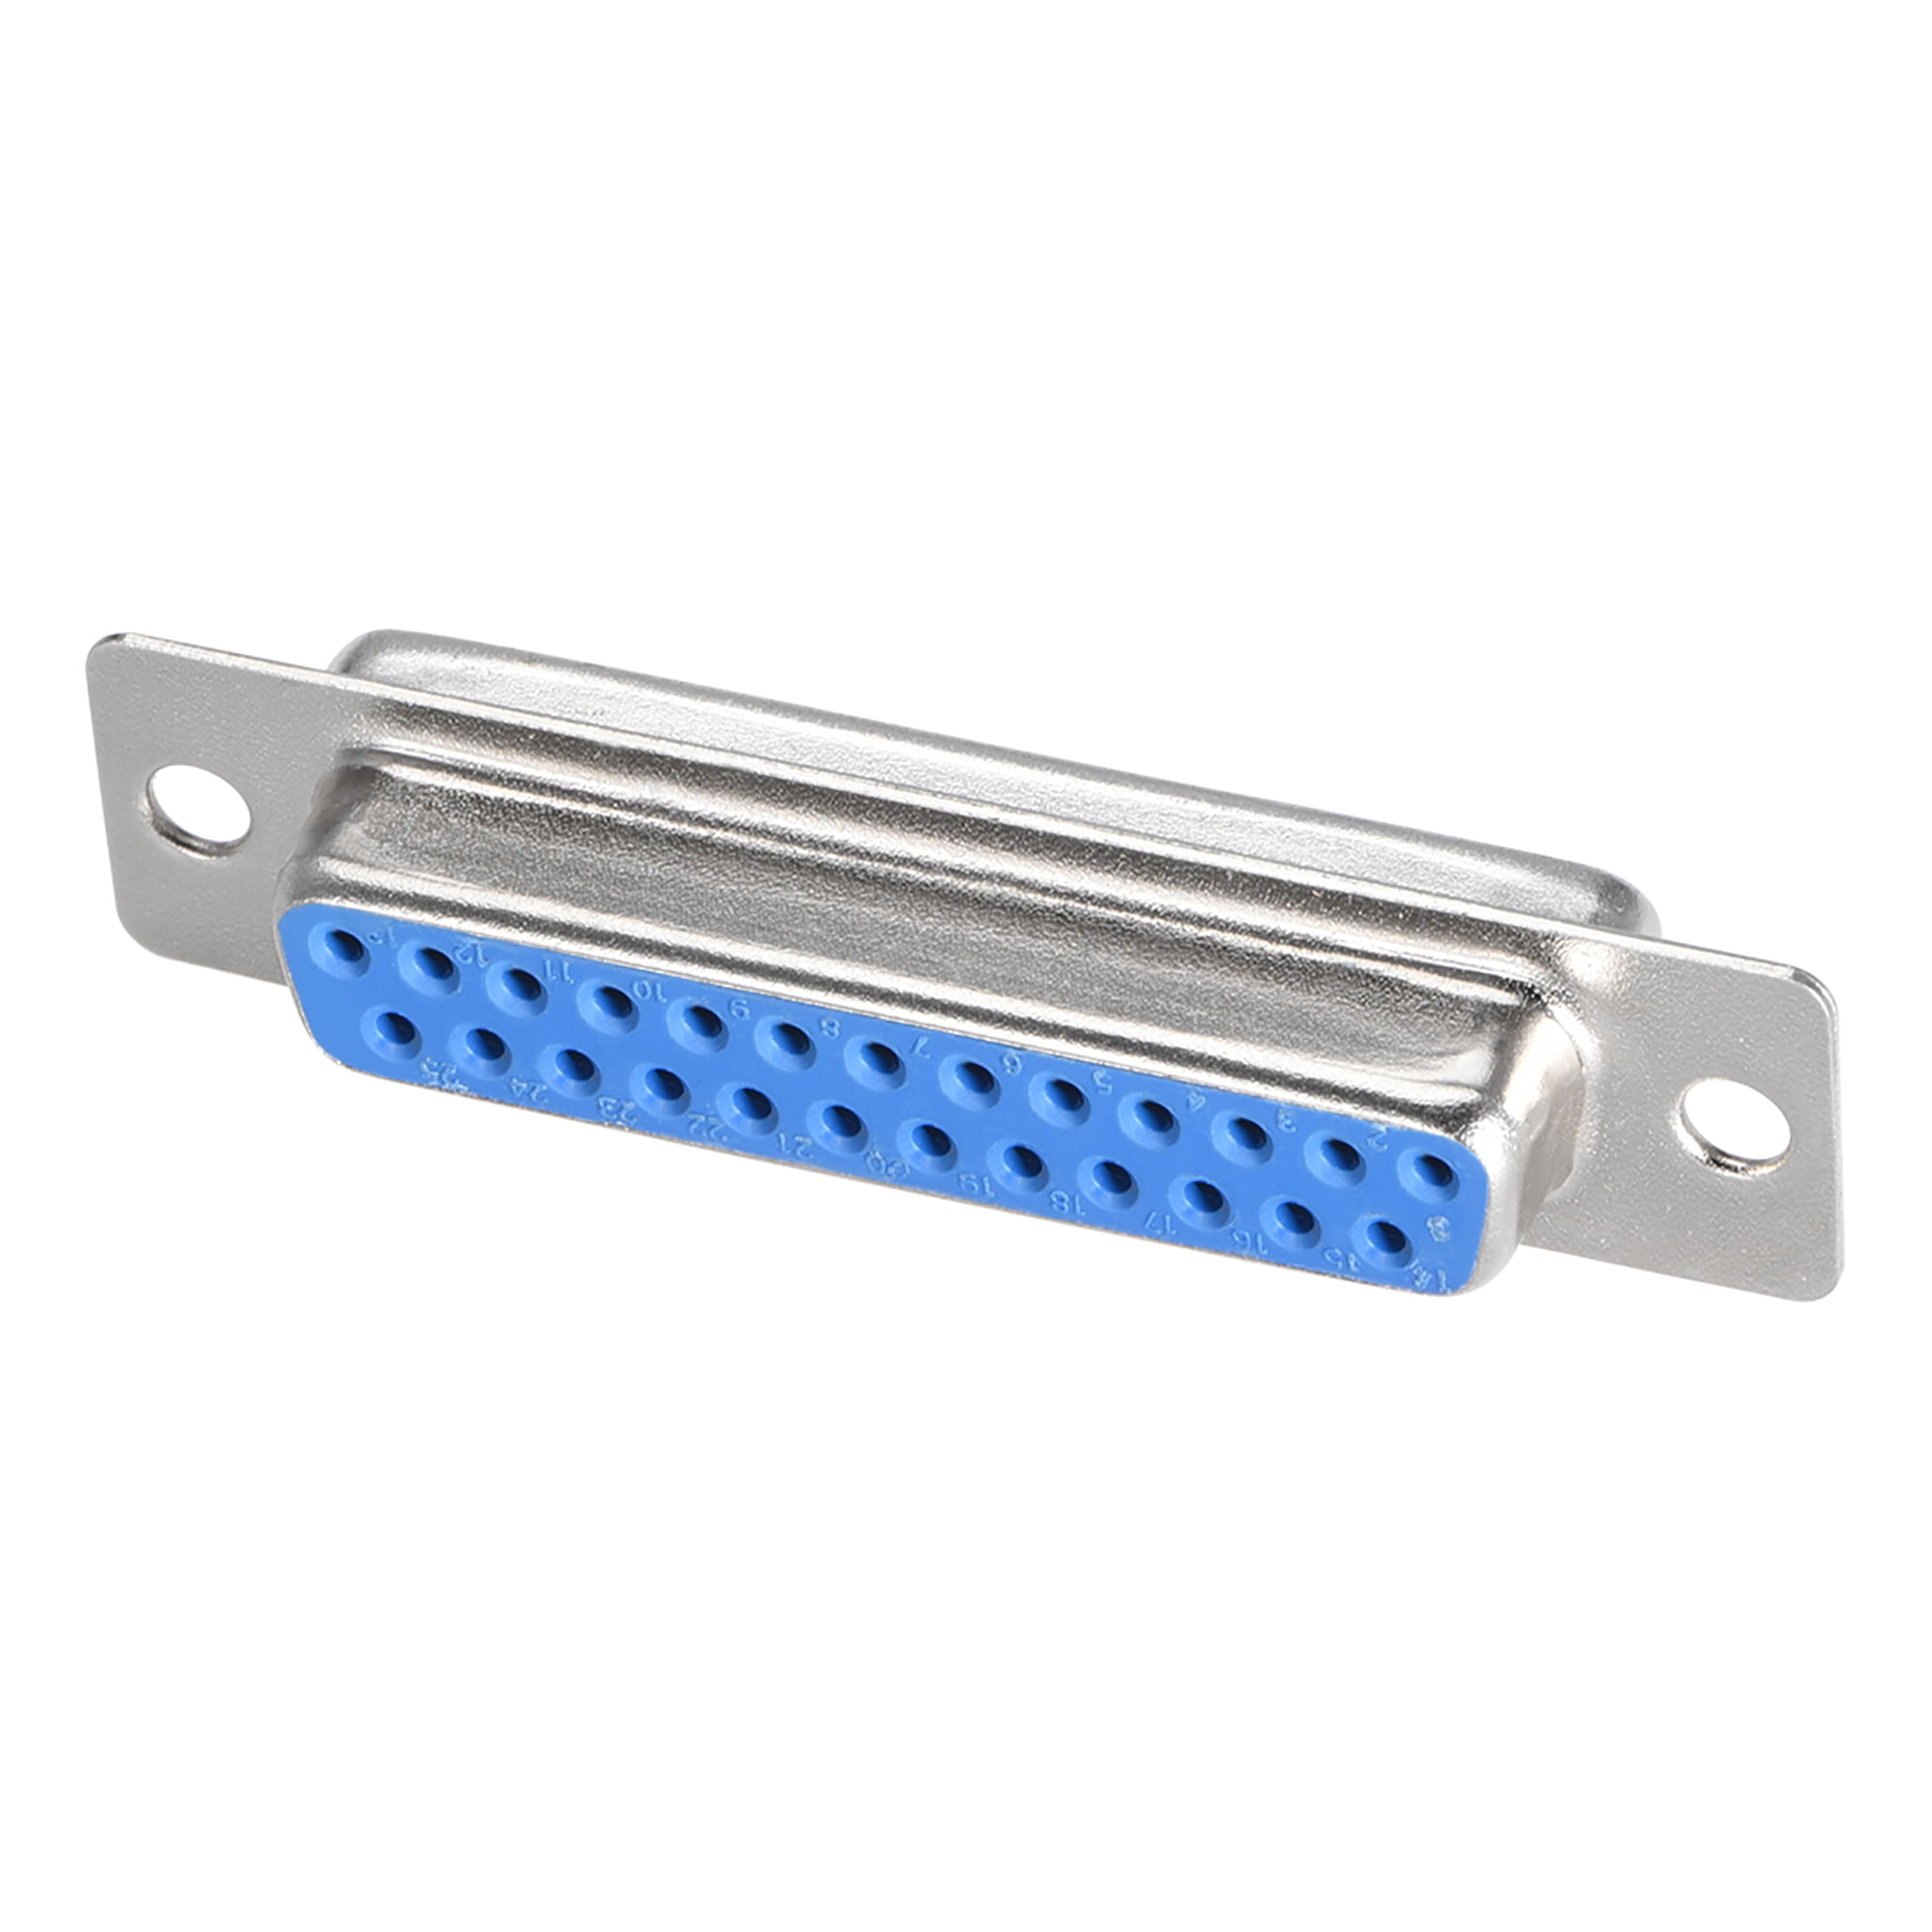 sourcing map D-sub Connector DB9 Female Socket 9-pin 2-row Port Terminal Breakout for Mechanical Equipment CNC Computers Blue Pack of 1